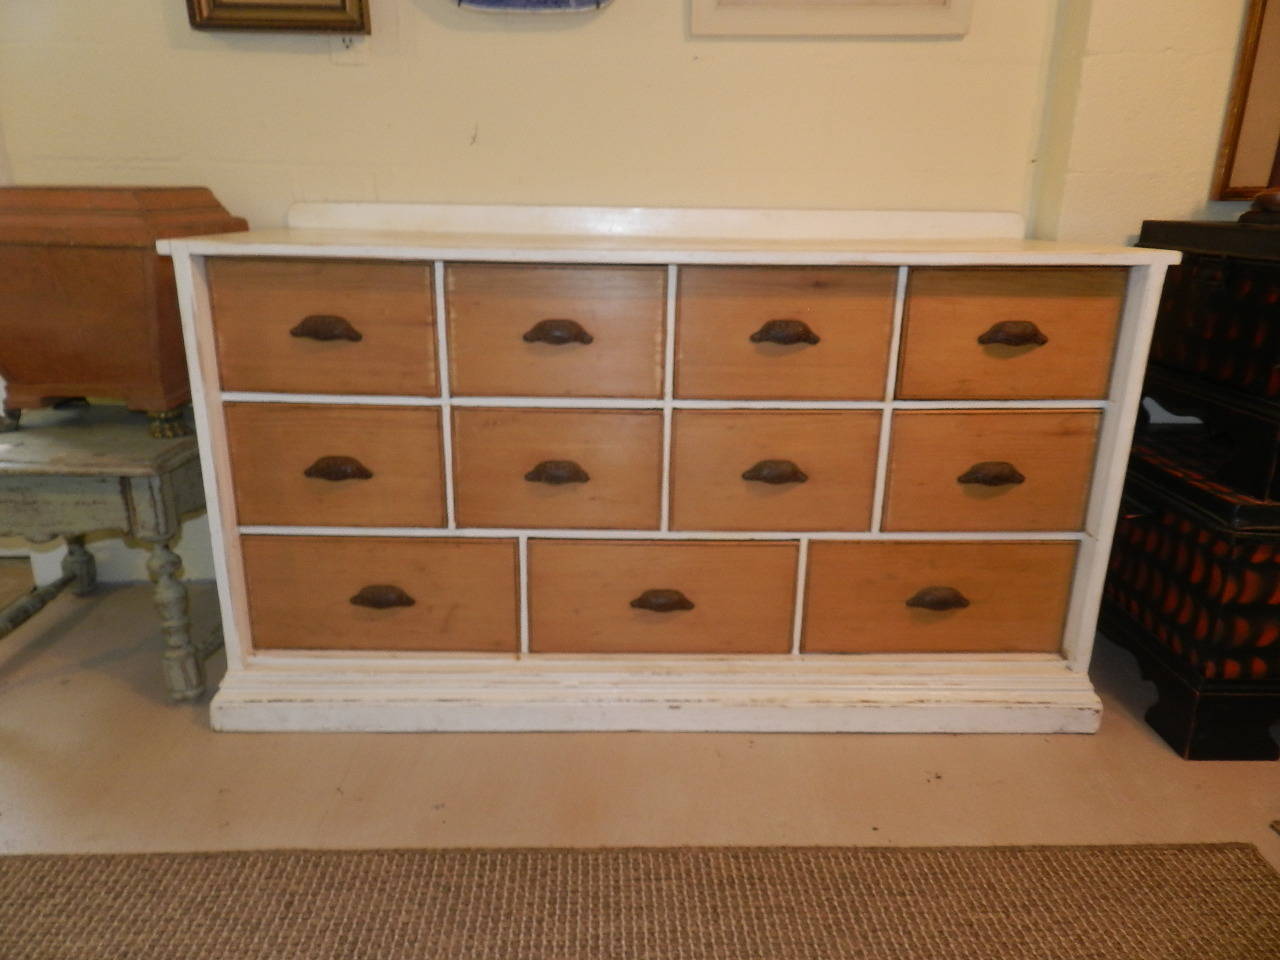 Antique pine apothecary drawers or shop counter. All handles are original cast metal and all the drawers are dovetailed.